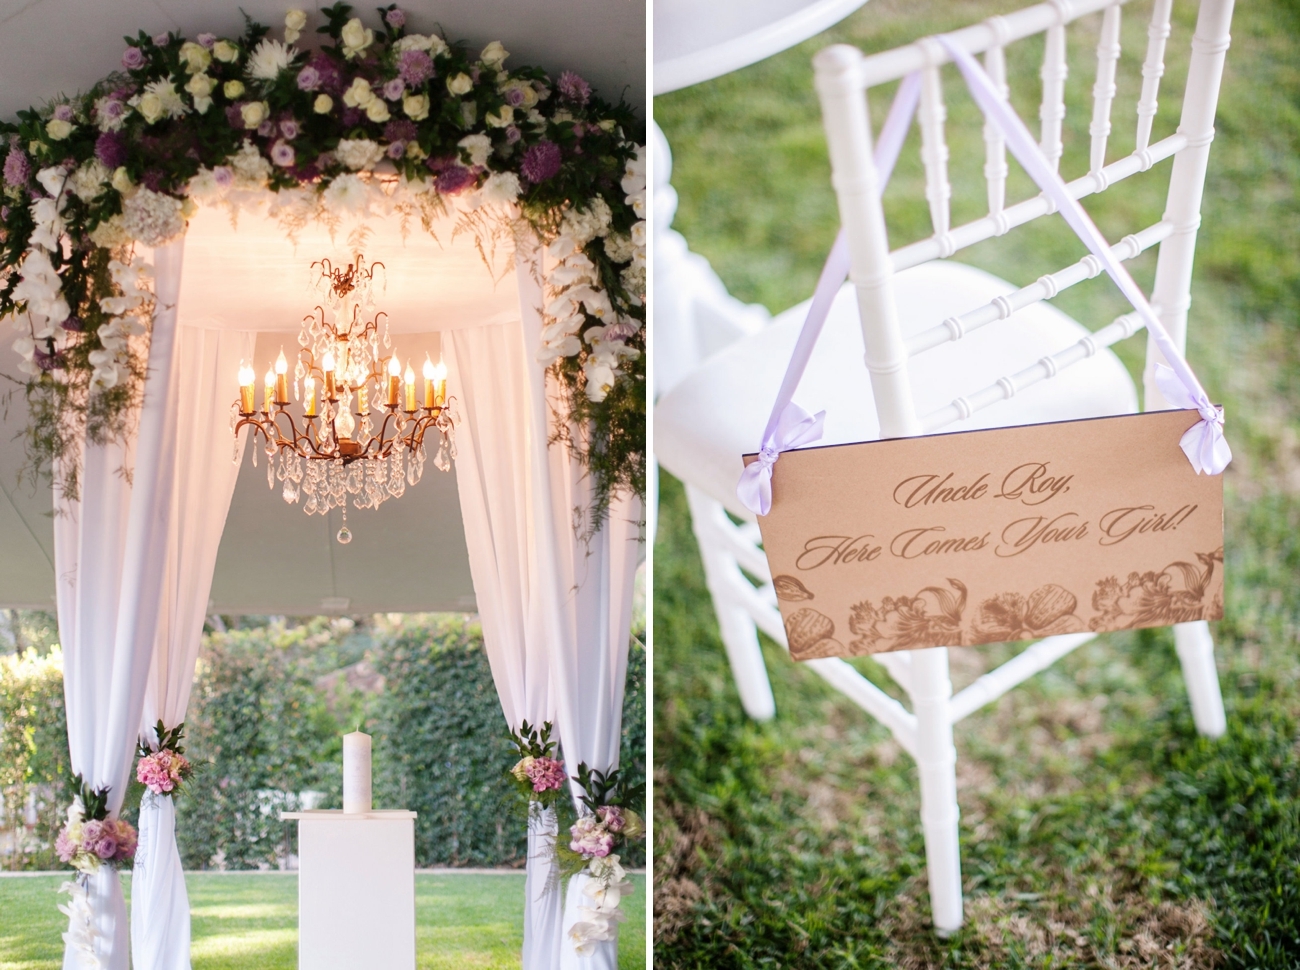 Luxurious Floral Wedding Ceremony Decor | Credit: Tyme Photography & Wedding Concepts